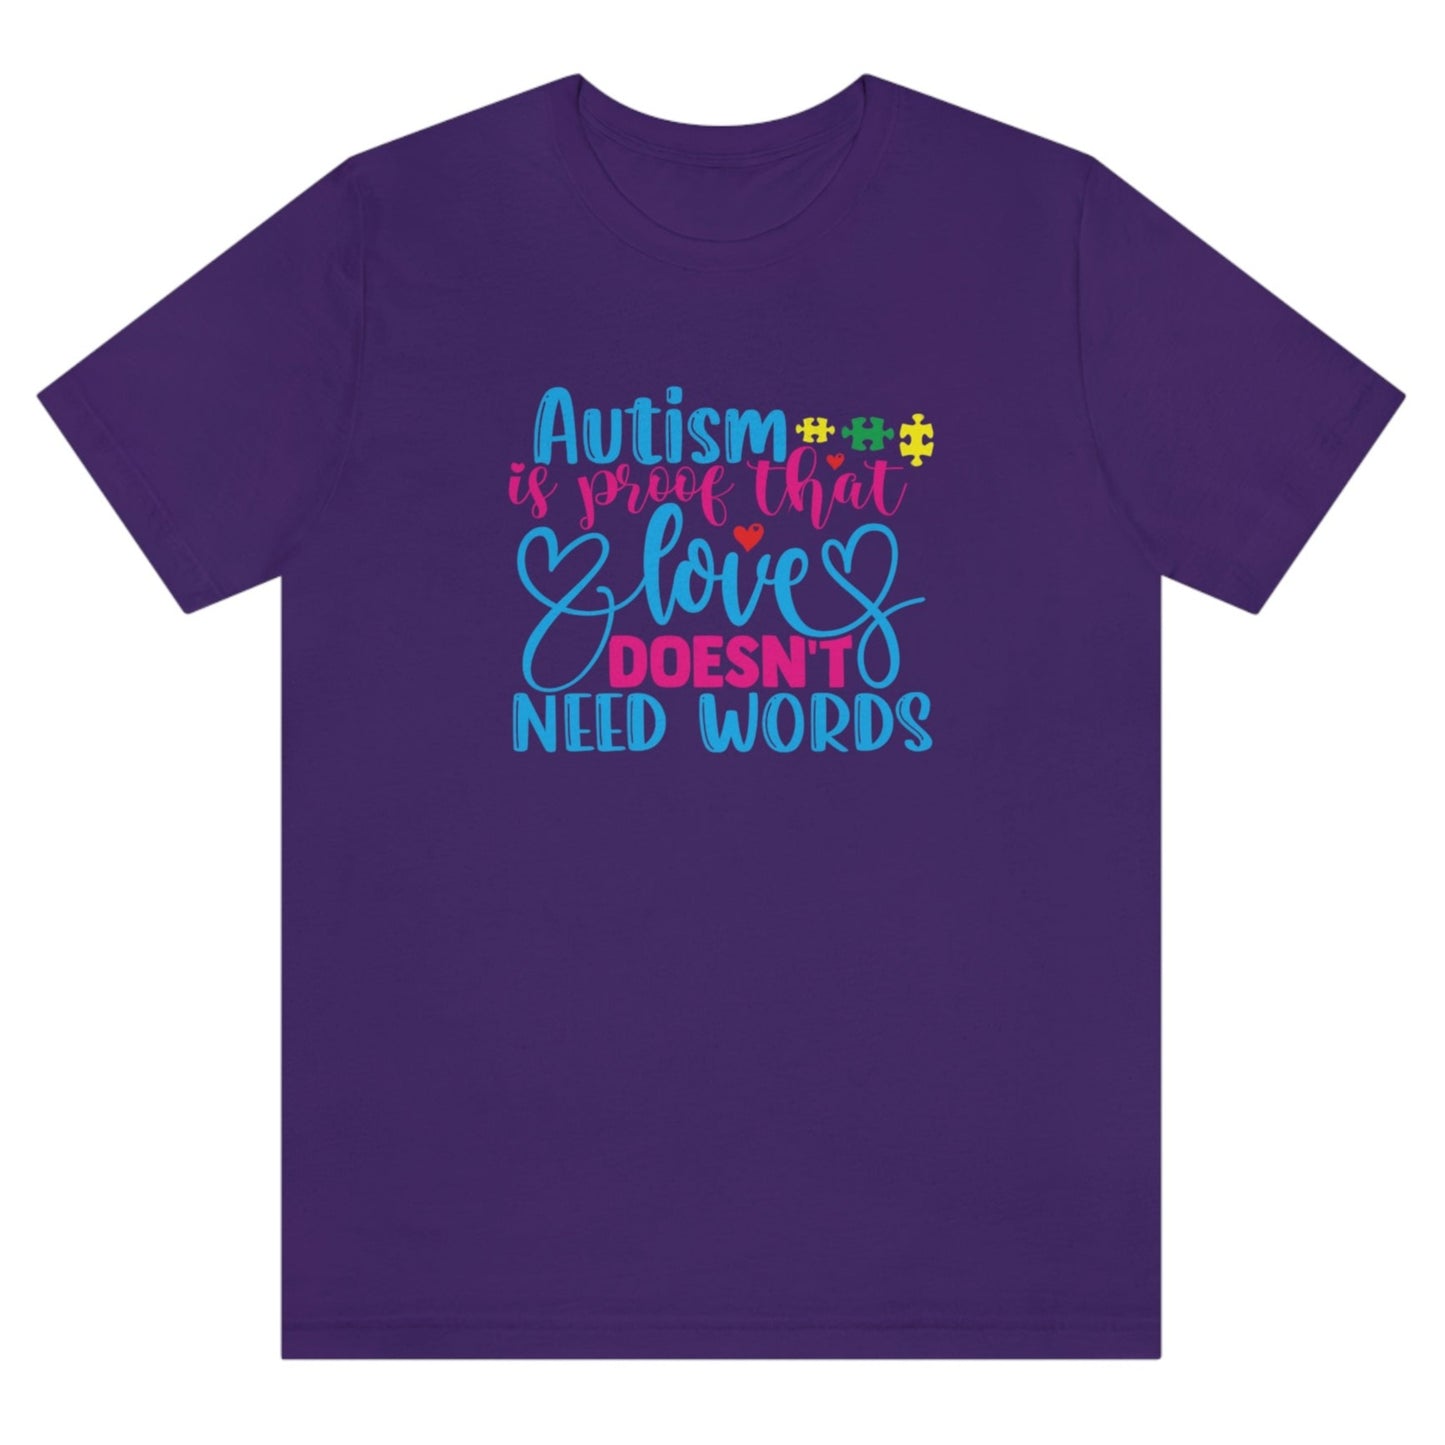 autism-is-proof-that-love-doesnt-need-words-team-purple-t-shirt-awareness